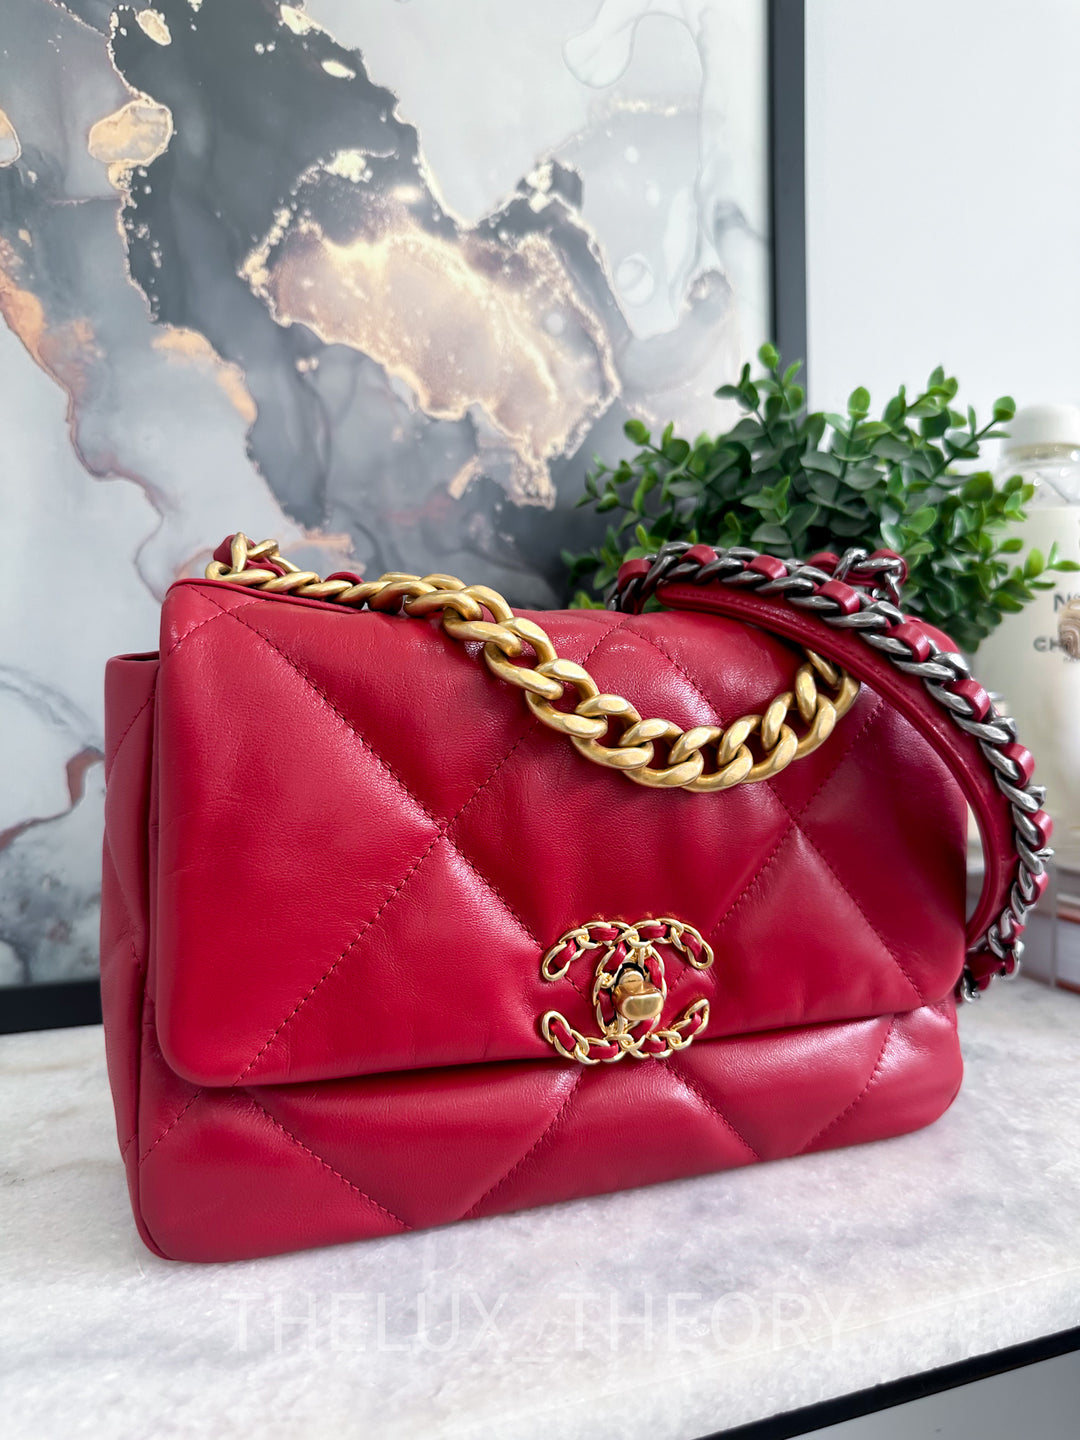 20B RED SMALL 19 FLAP BAG GOAT SKIN AGED GOLD HARDWARE